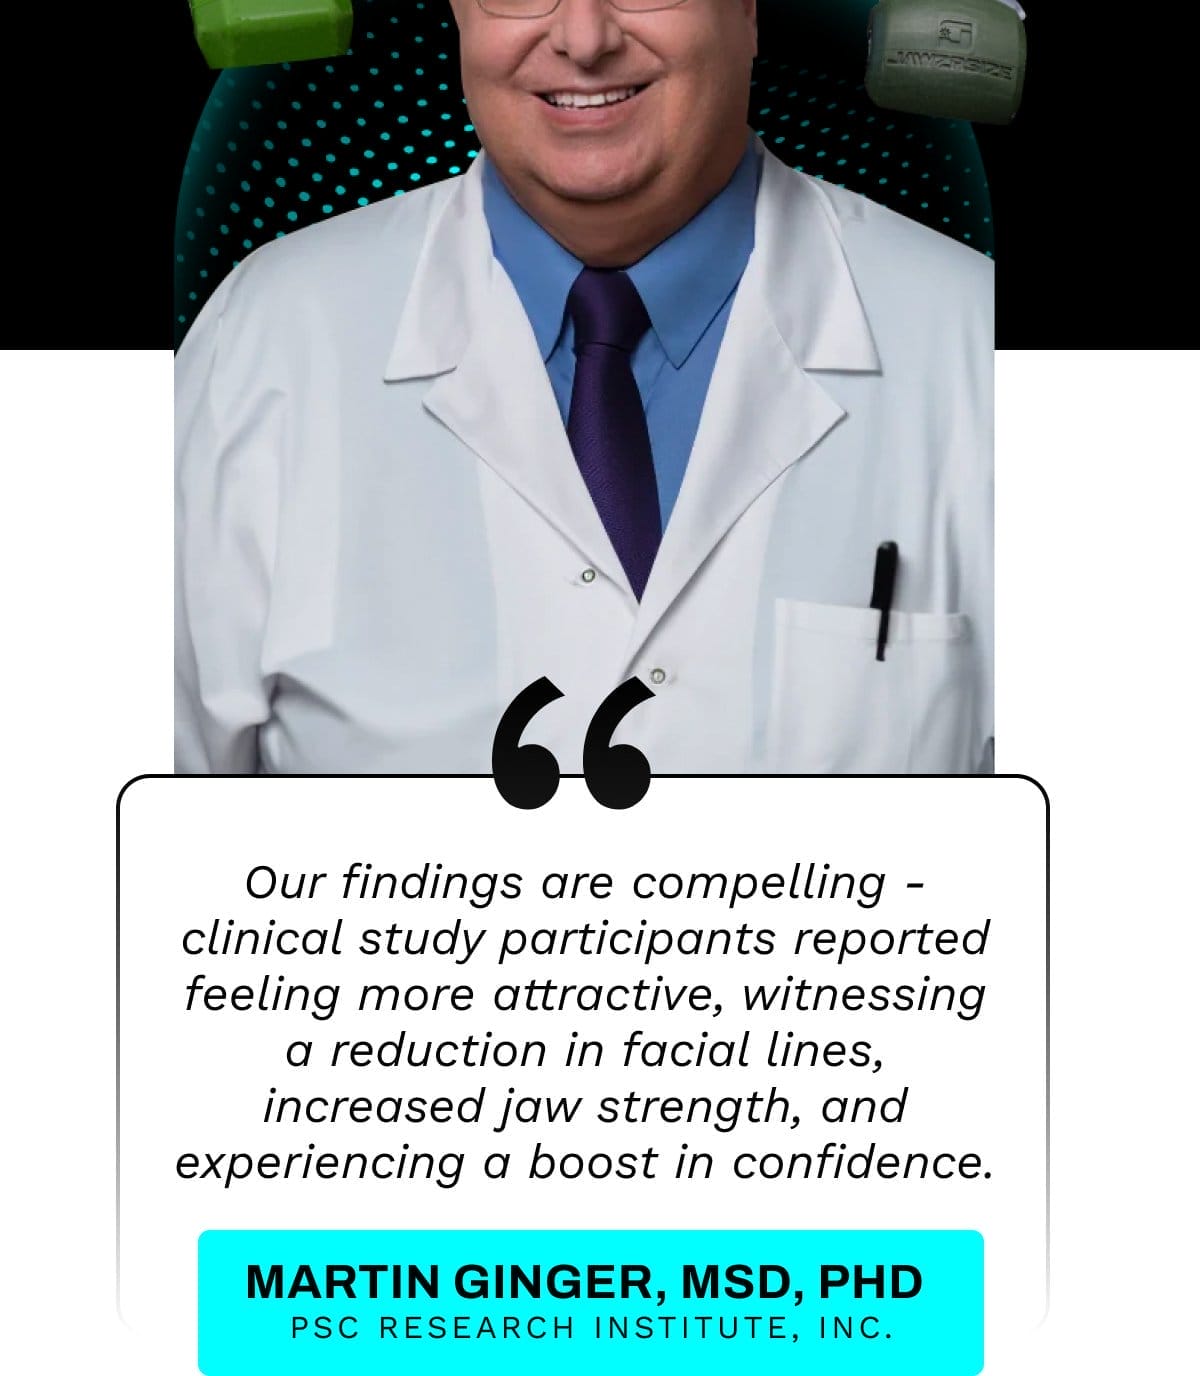 Our findings are compelling - clinical study participants reported feeling more attractive, witnessing a reduction in facial lines, increased jaw strength, and experiencing a boost in confidence.